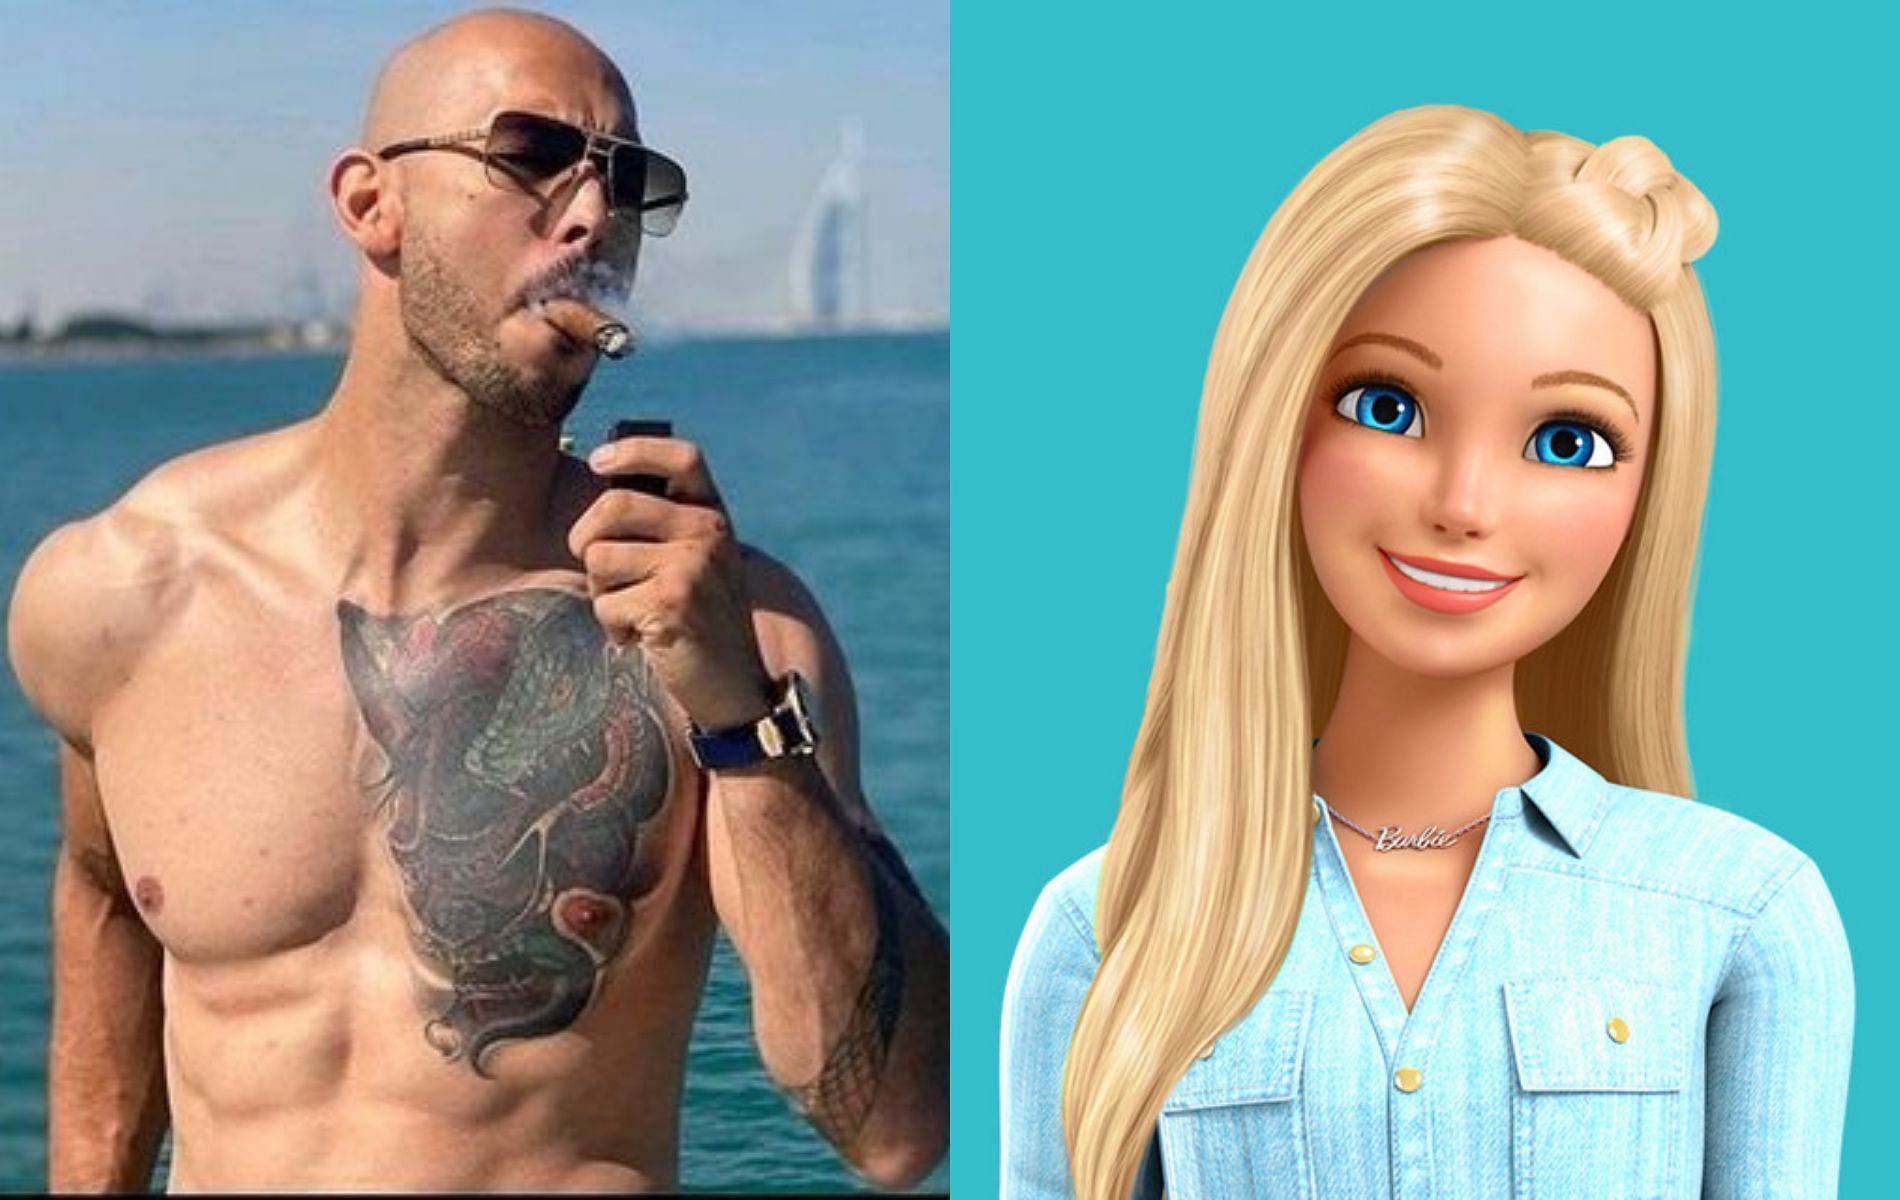 Andrew Tate (left) and Barbie (right)